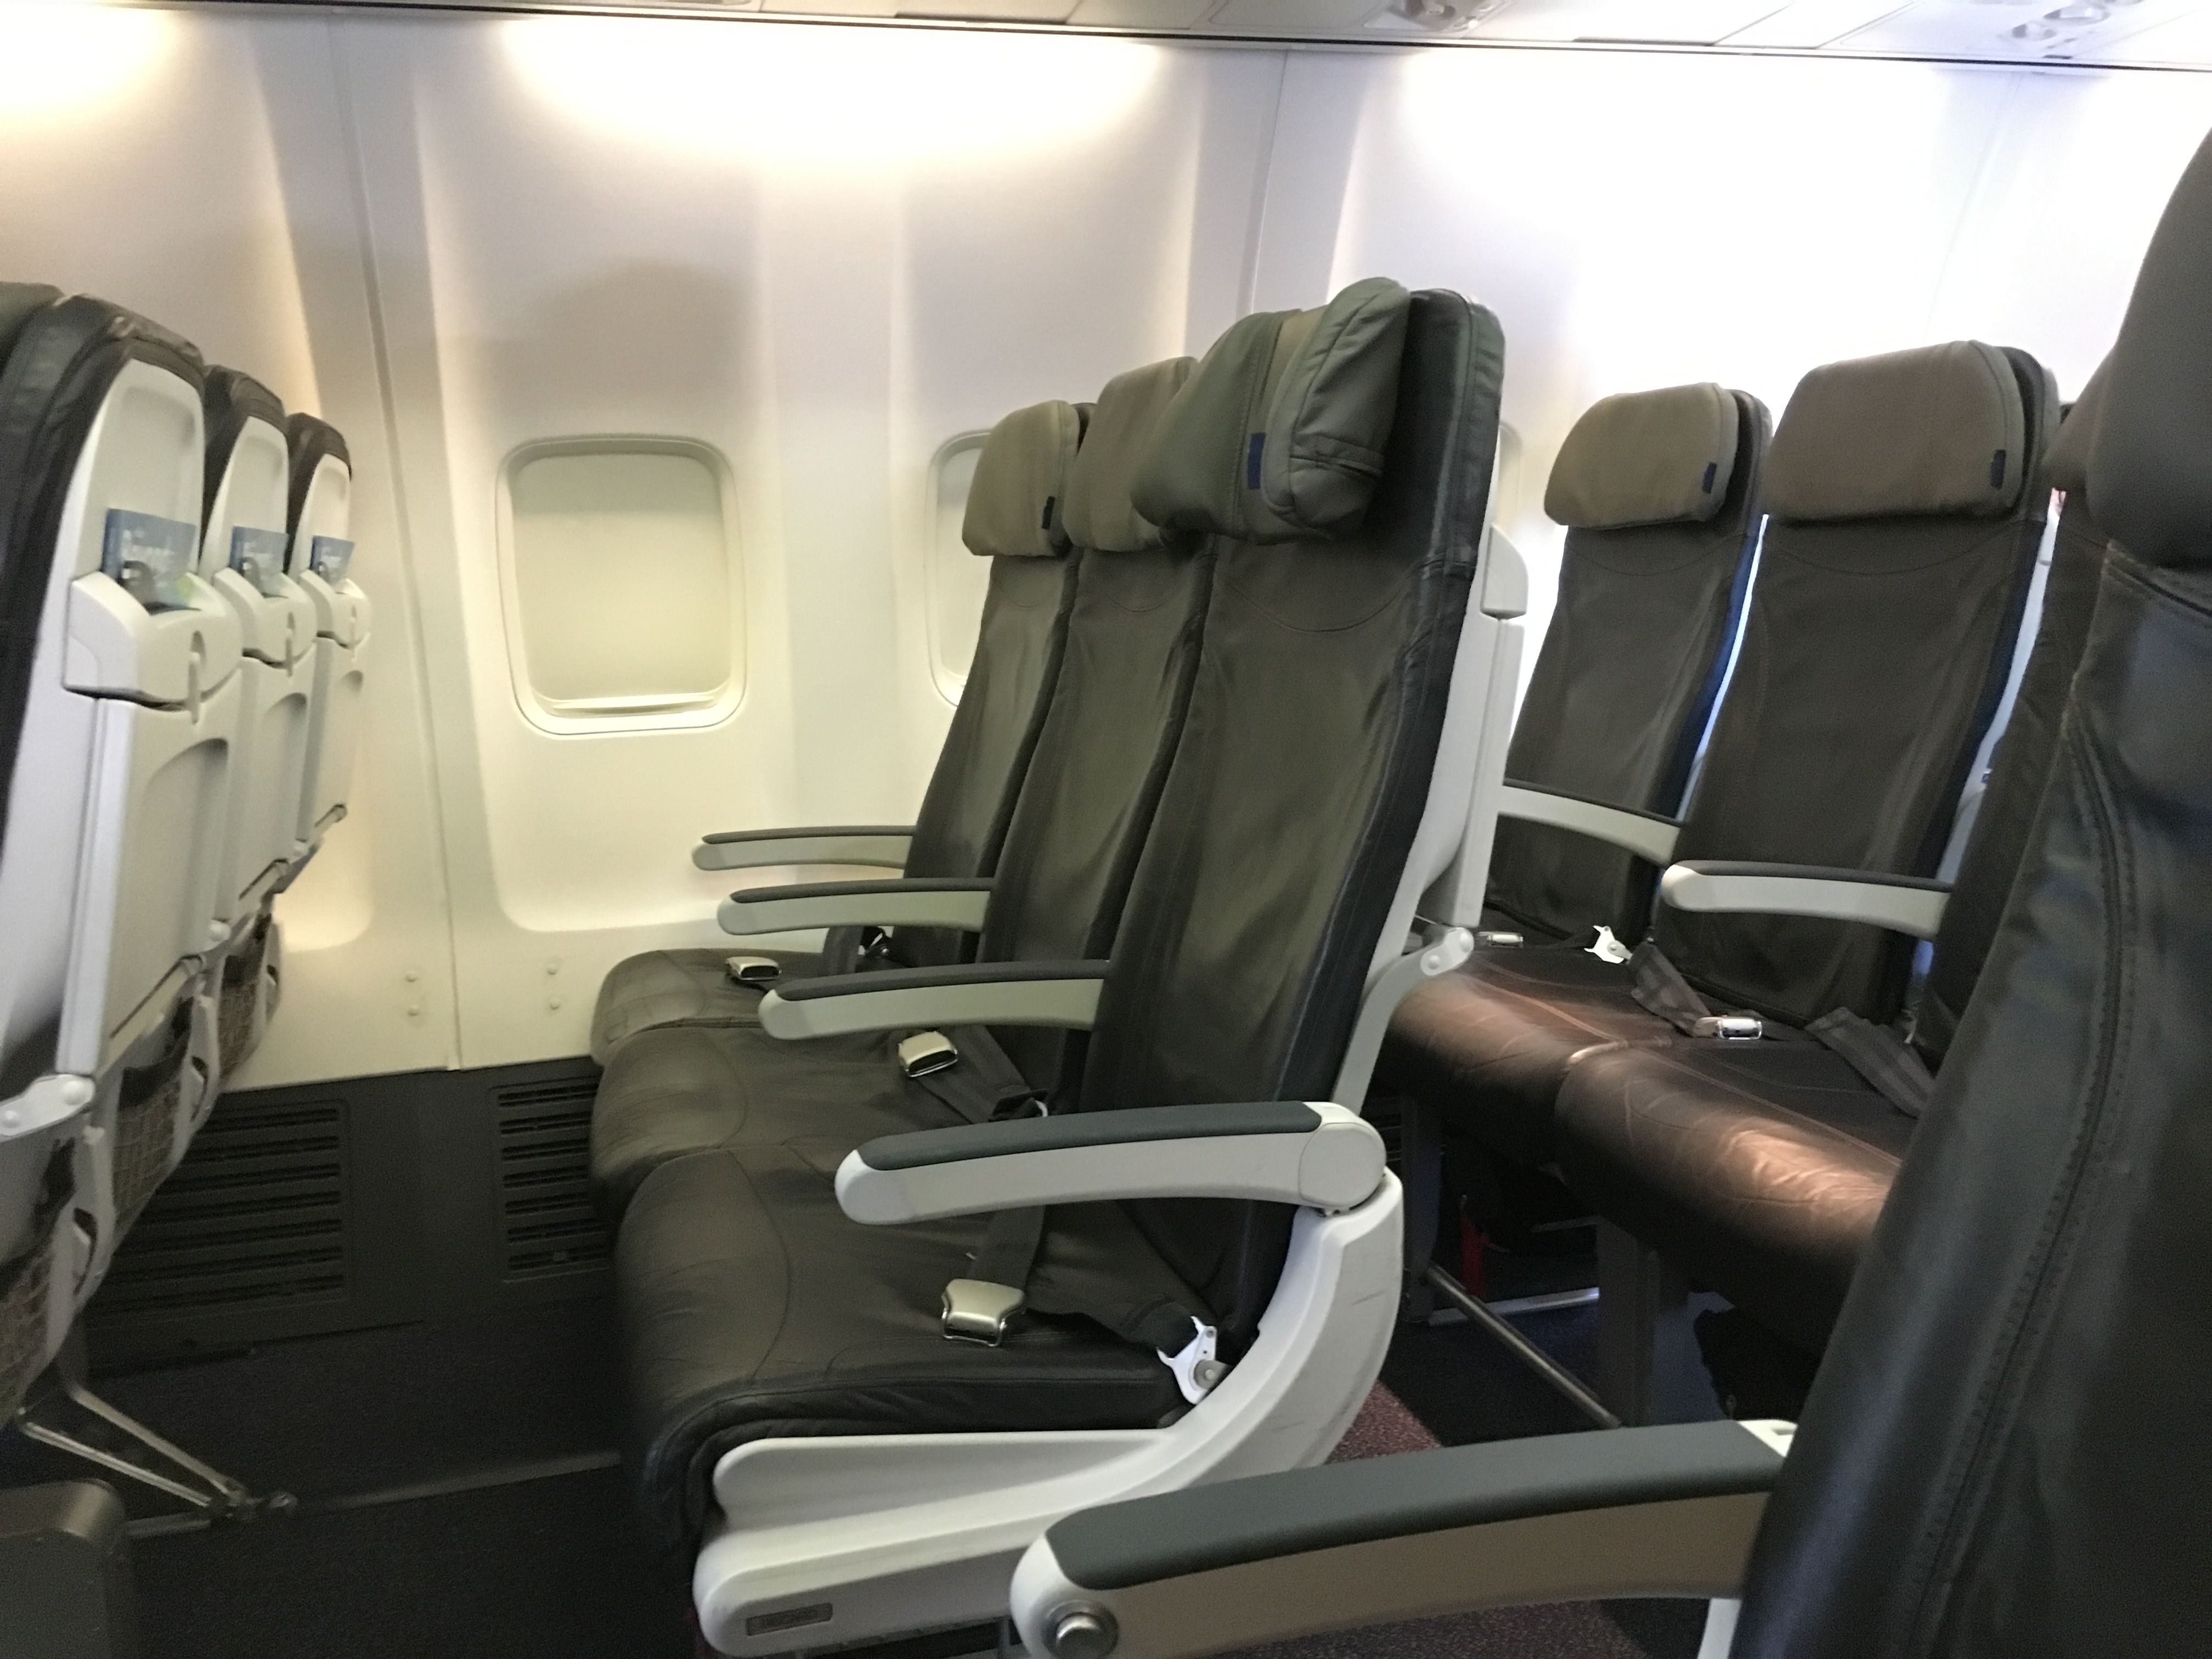 Flight Review: Alaska Airlines (Boeing 737-800) Premium Class From Seattle to Palm Springs